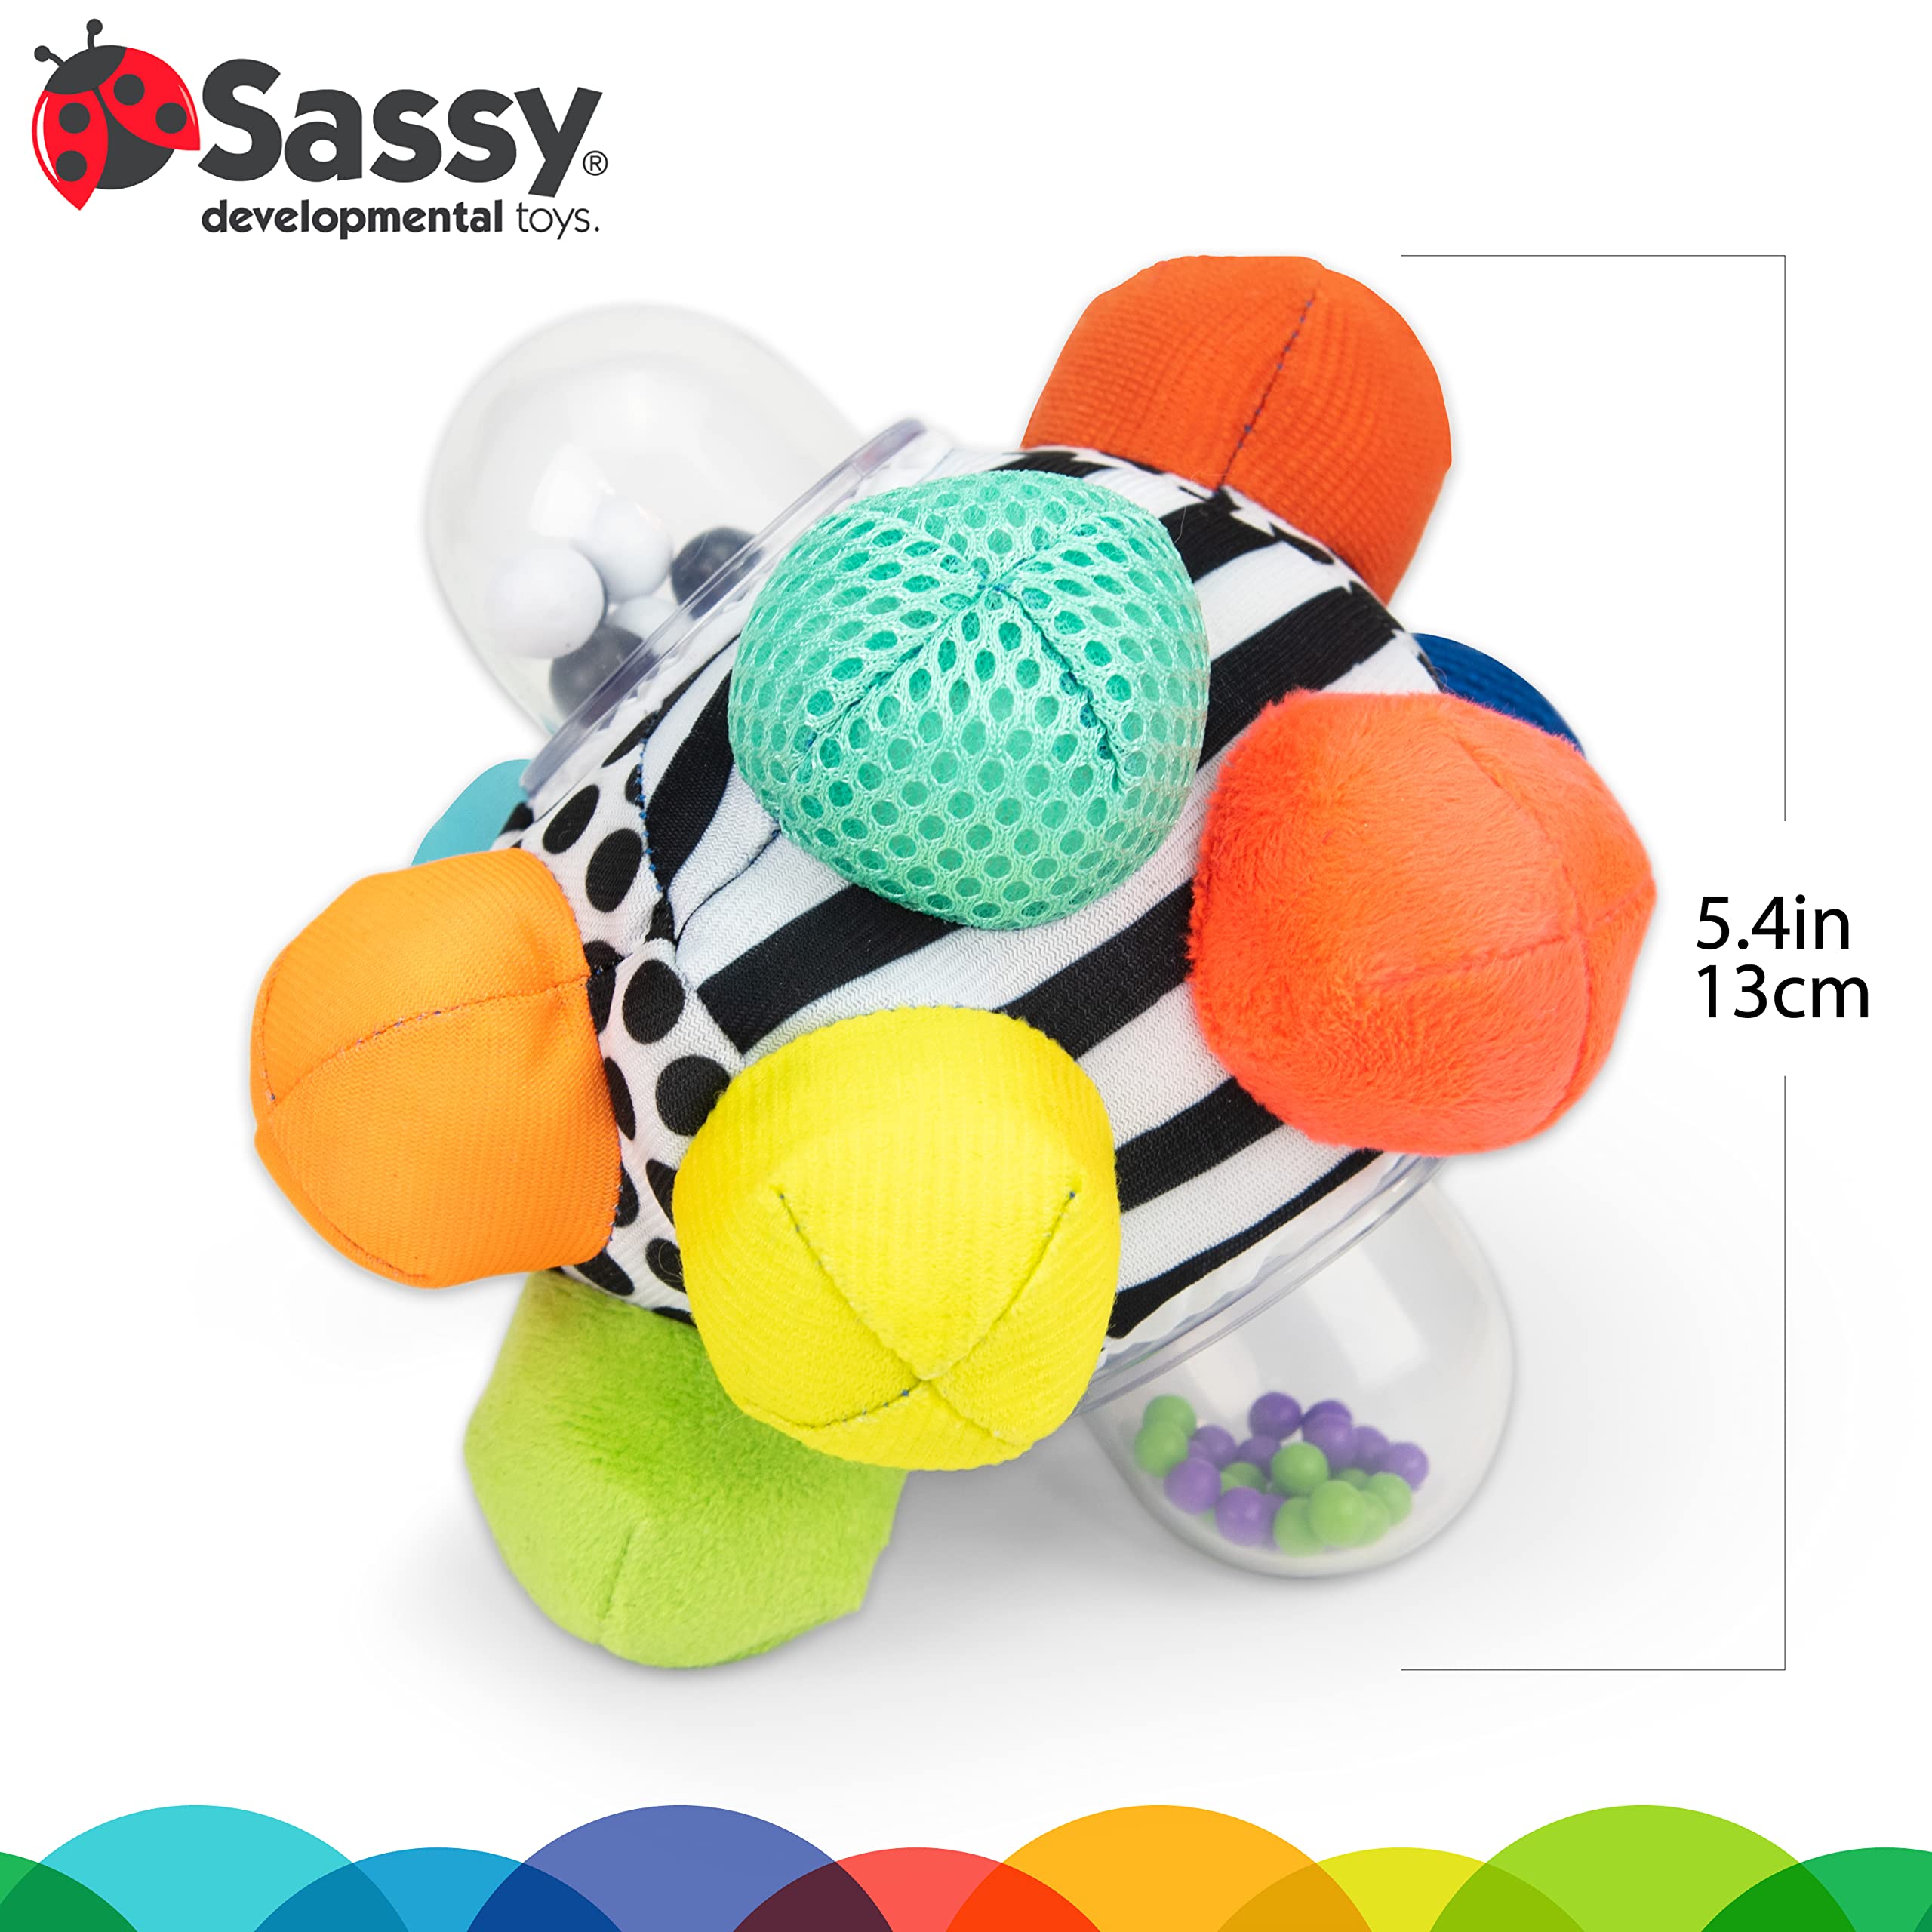 Developmental Bumpy Ball | Easy to Grasp Bumps Help Develop Motor S##### | for Ages 6 Months and Up | Colors May Vary